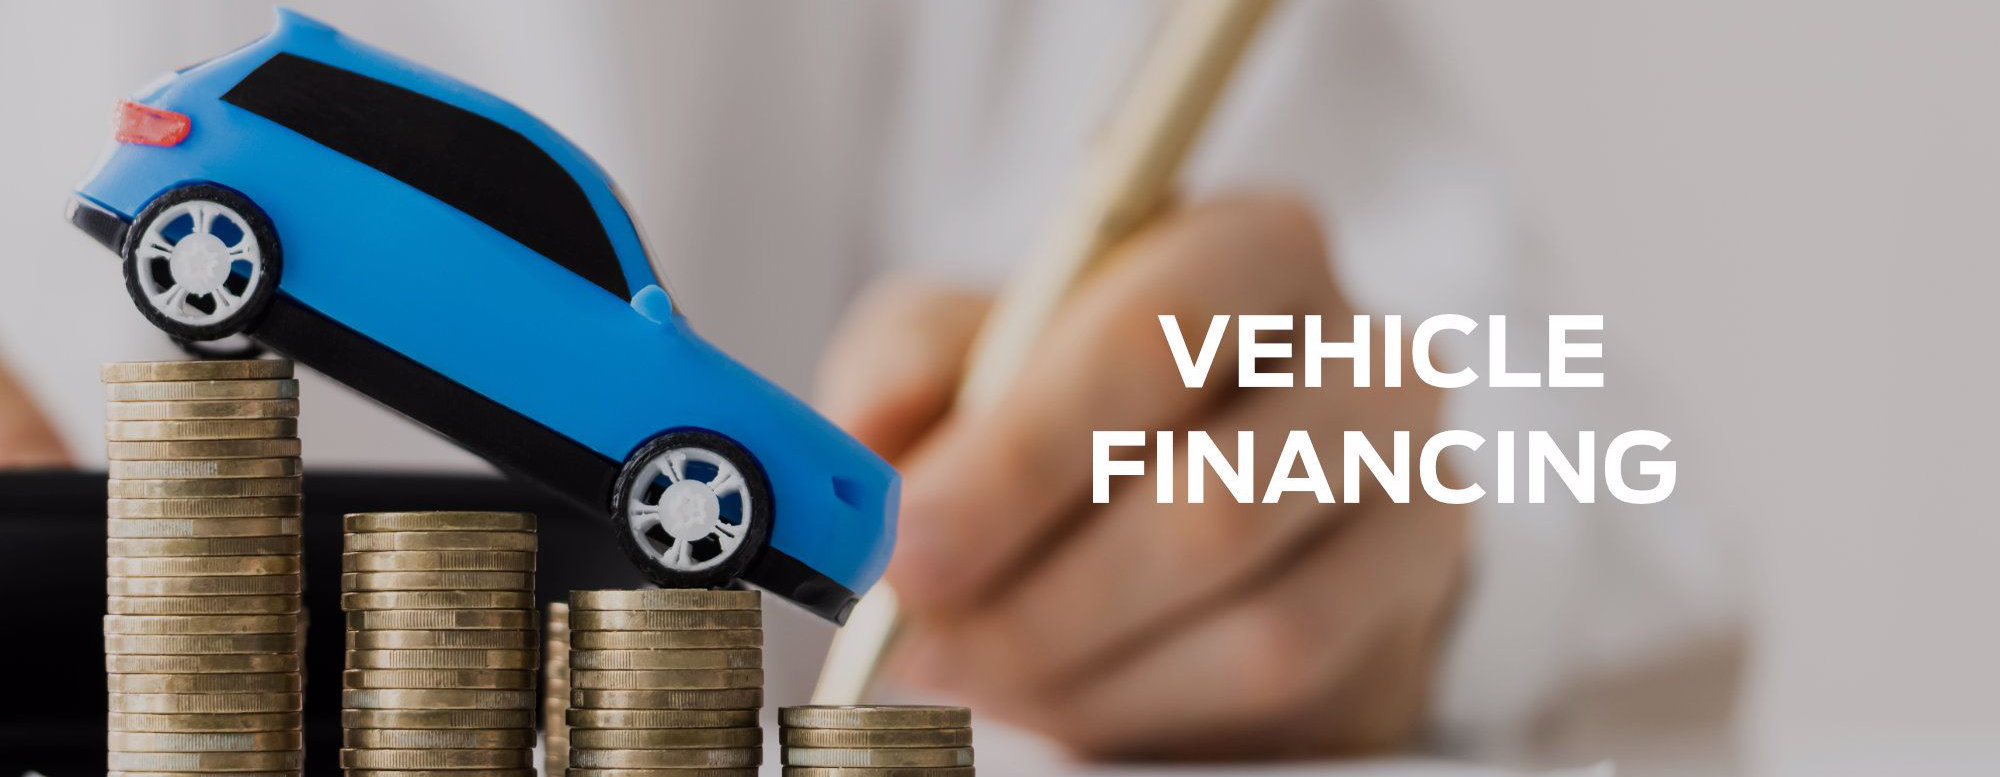 What Insurance Is Required When Financing A Car?